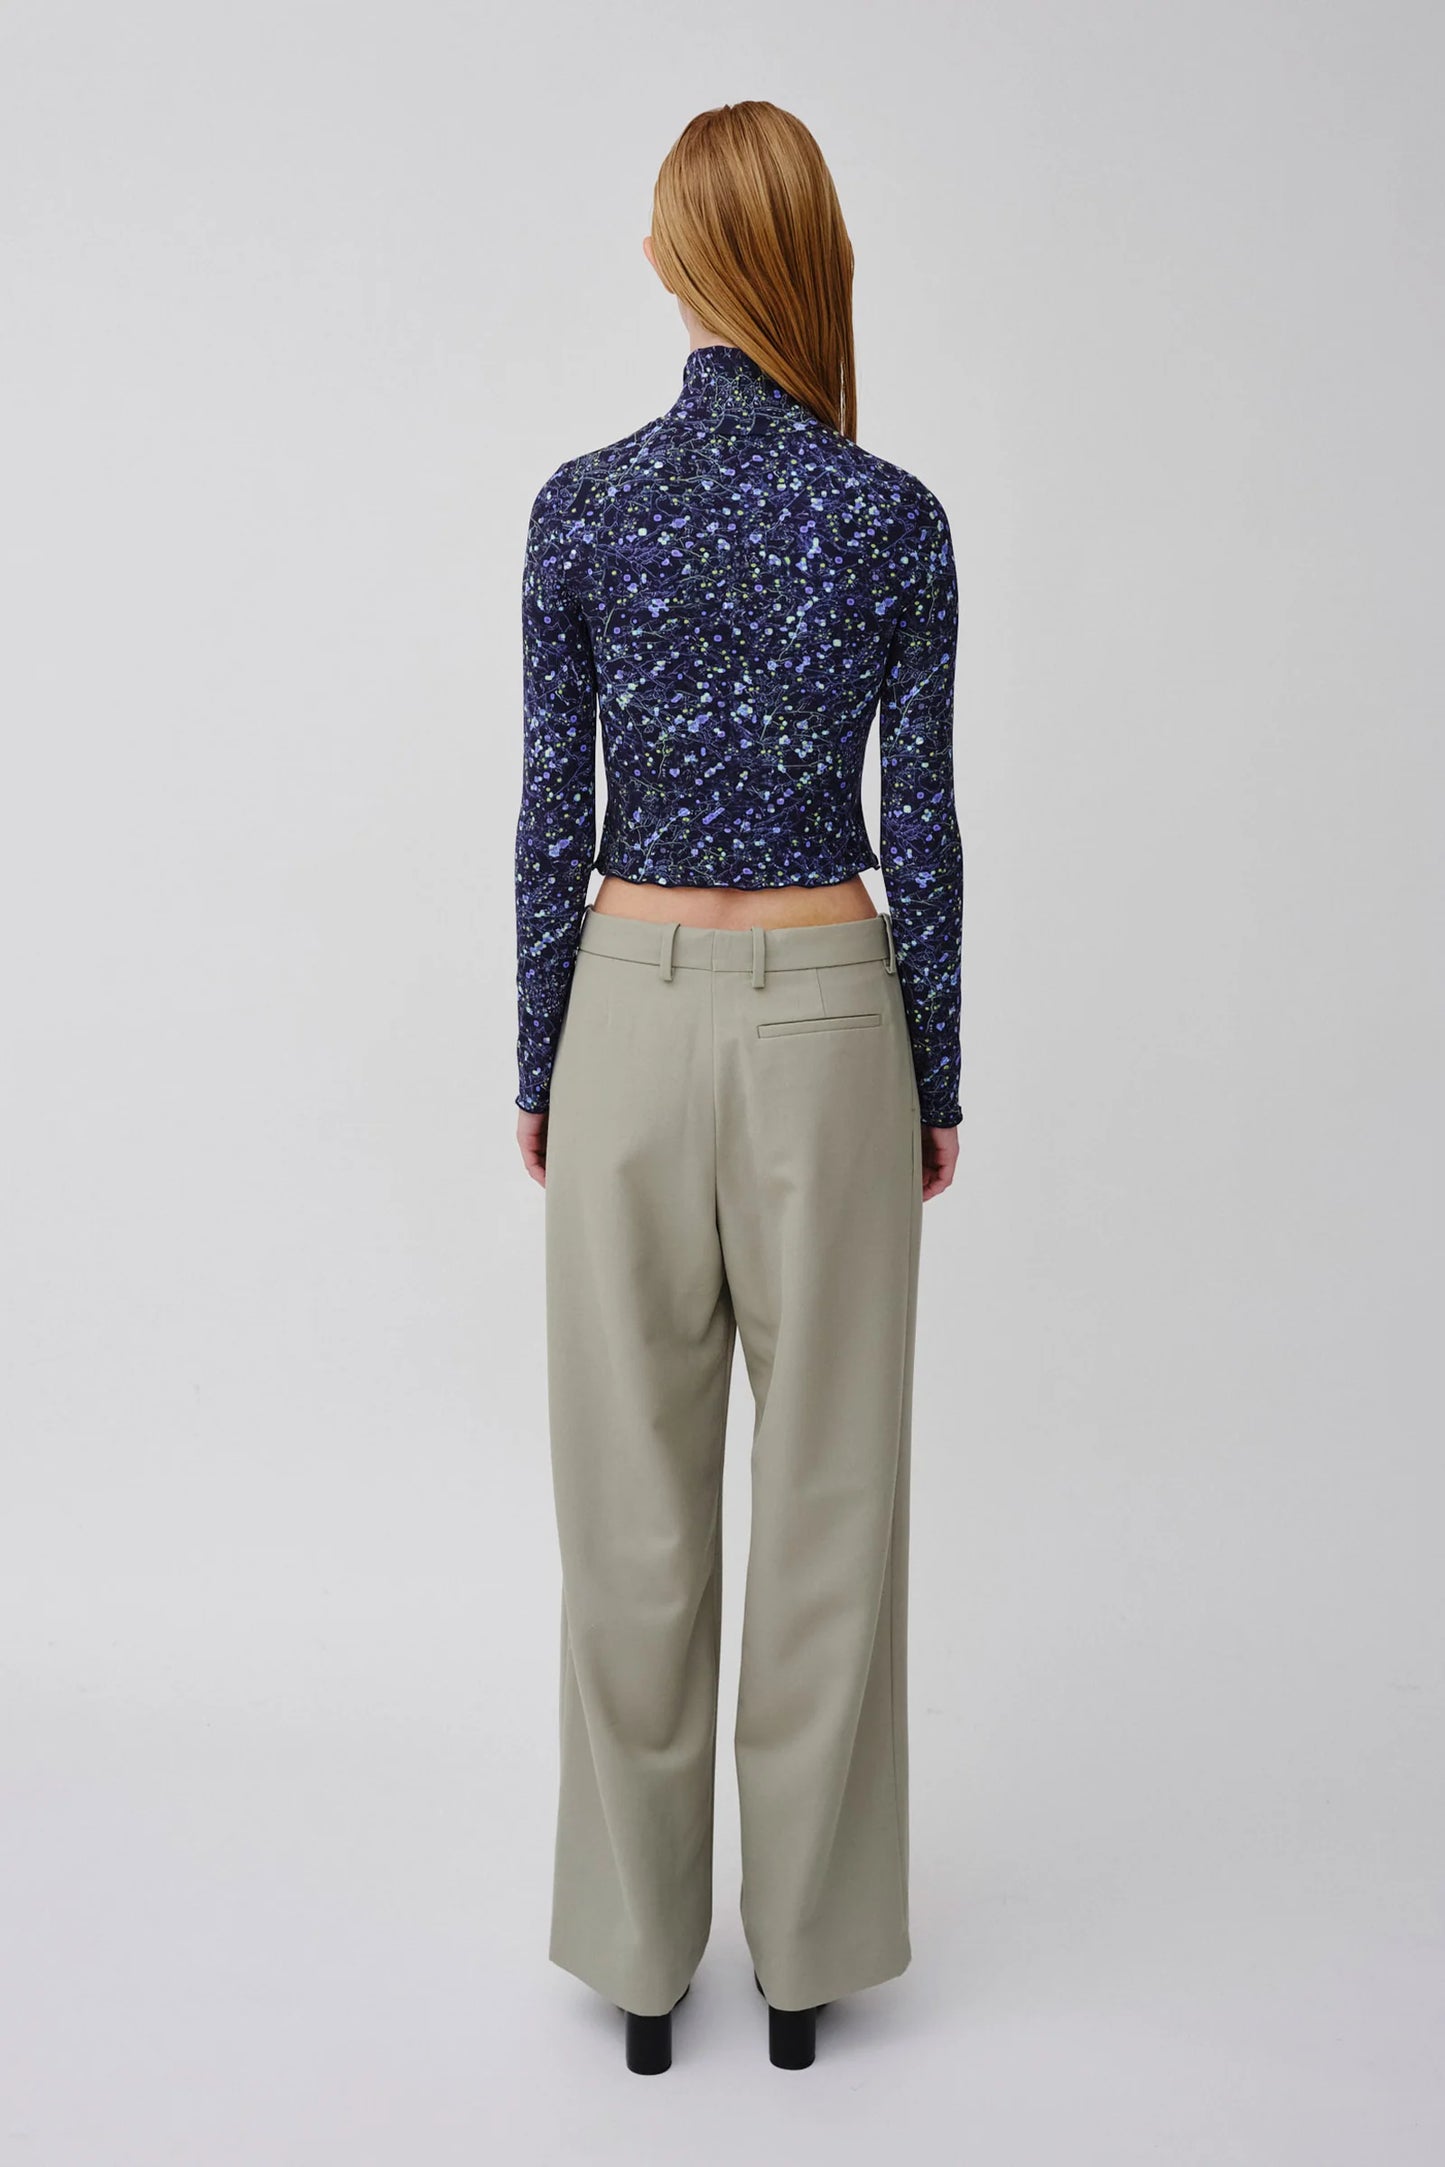 Won Hundred Camille Pant Seagrass